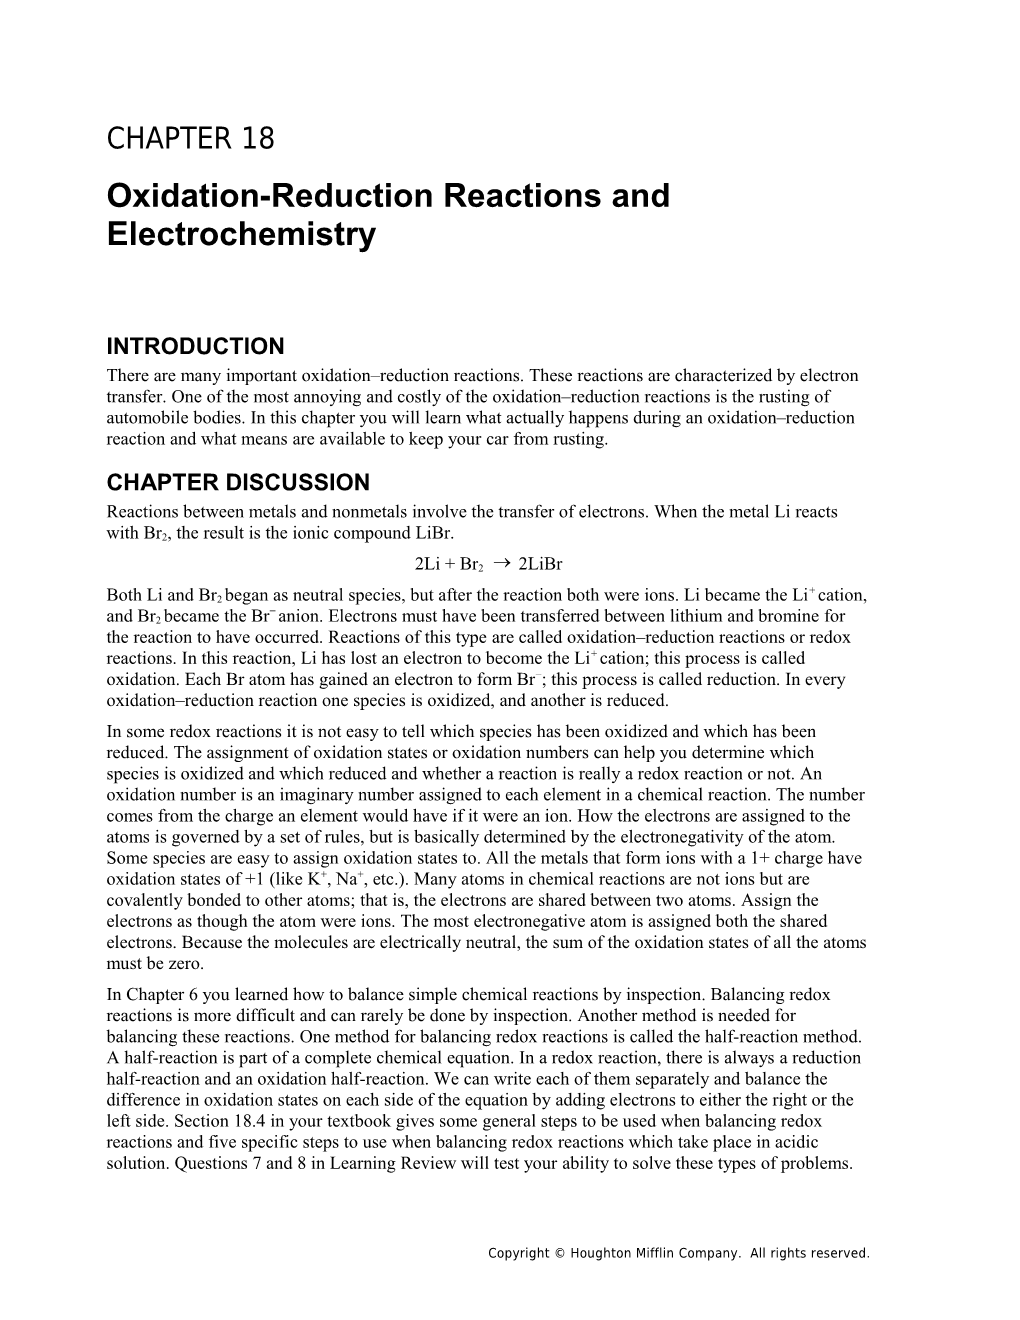 Chapter 18: Oxidation-Reduction Reactions and Electrochemistry 1